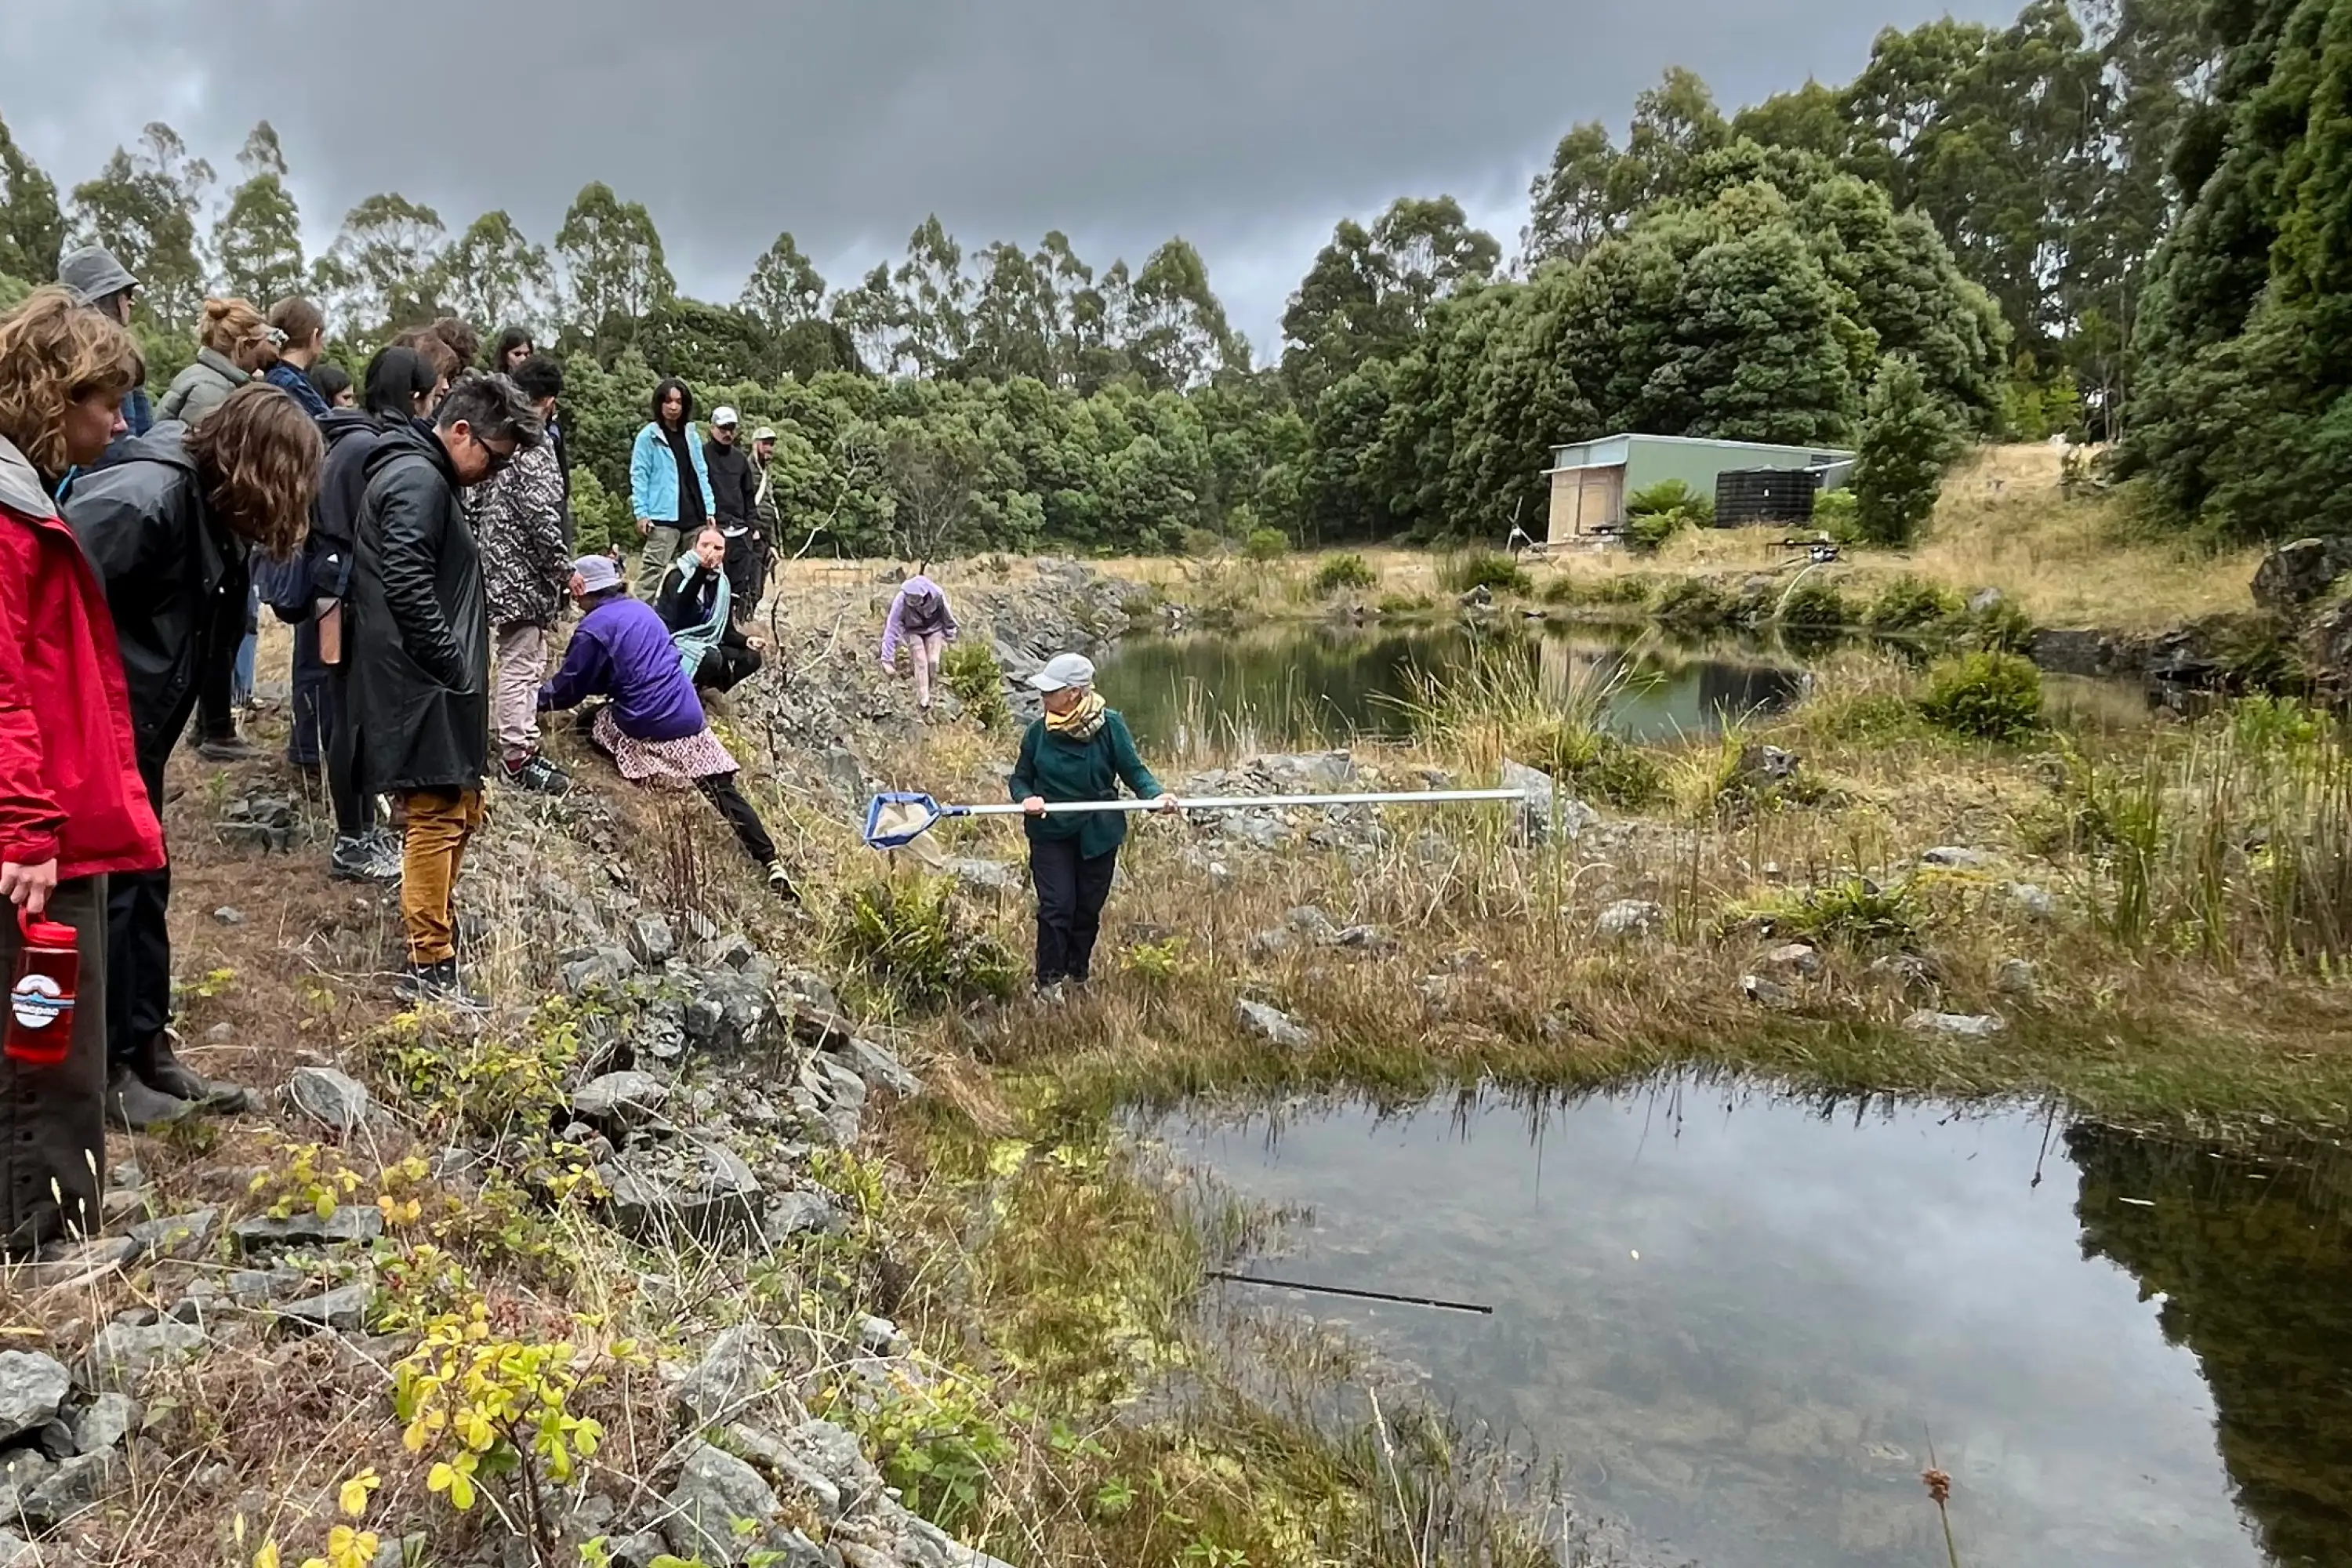 A group of people stand beside a large pond in the middle of a quarry, with one person holding a net with a very long handle.